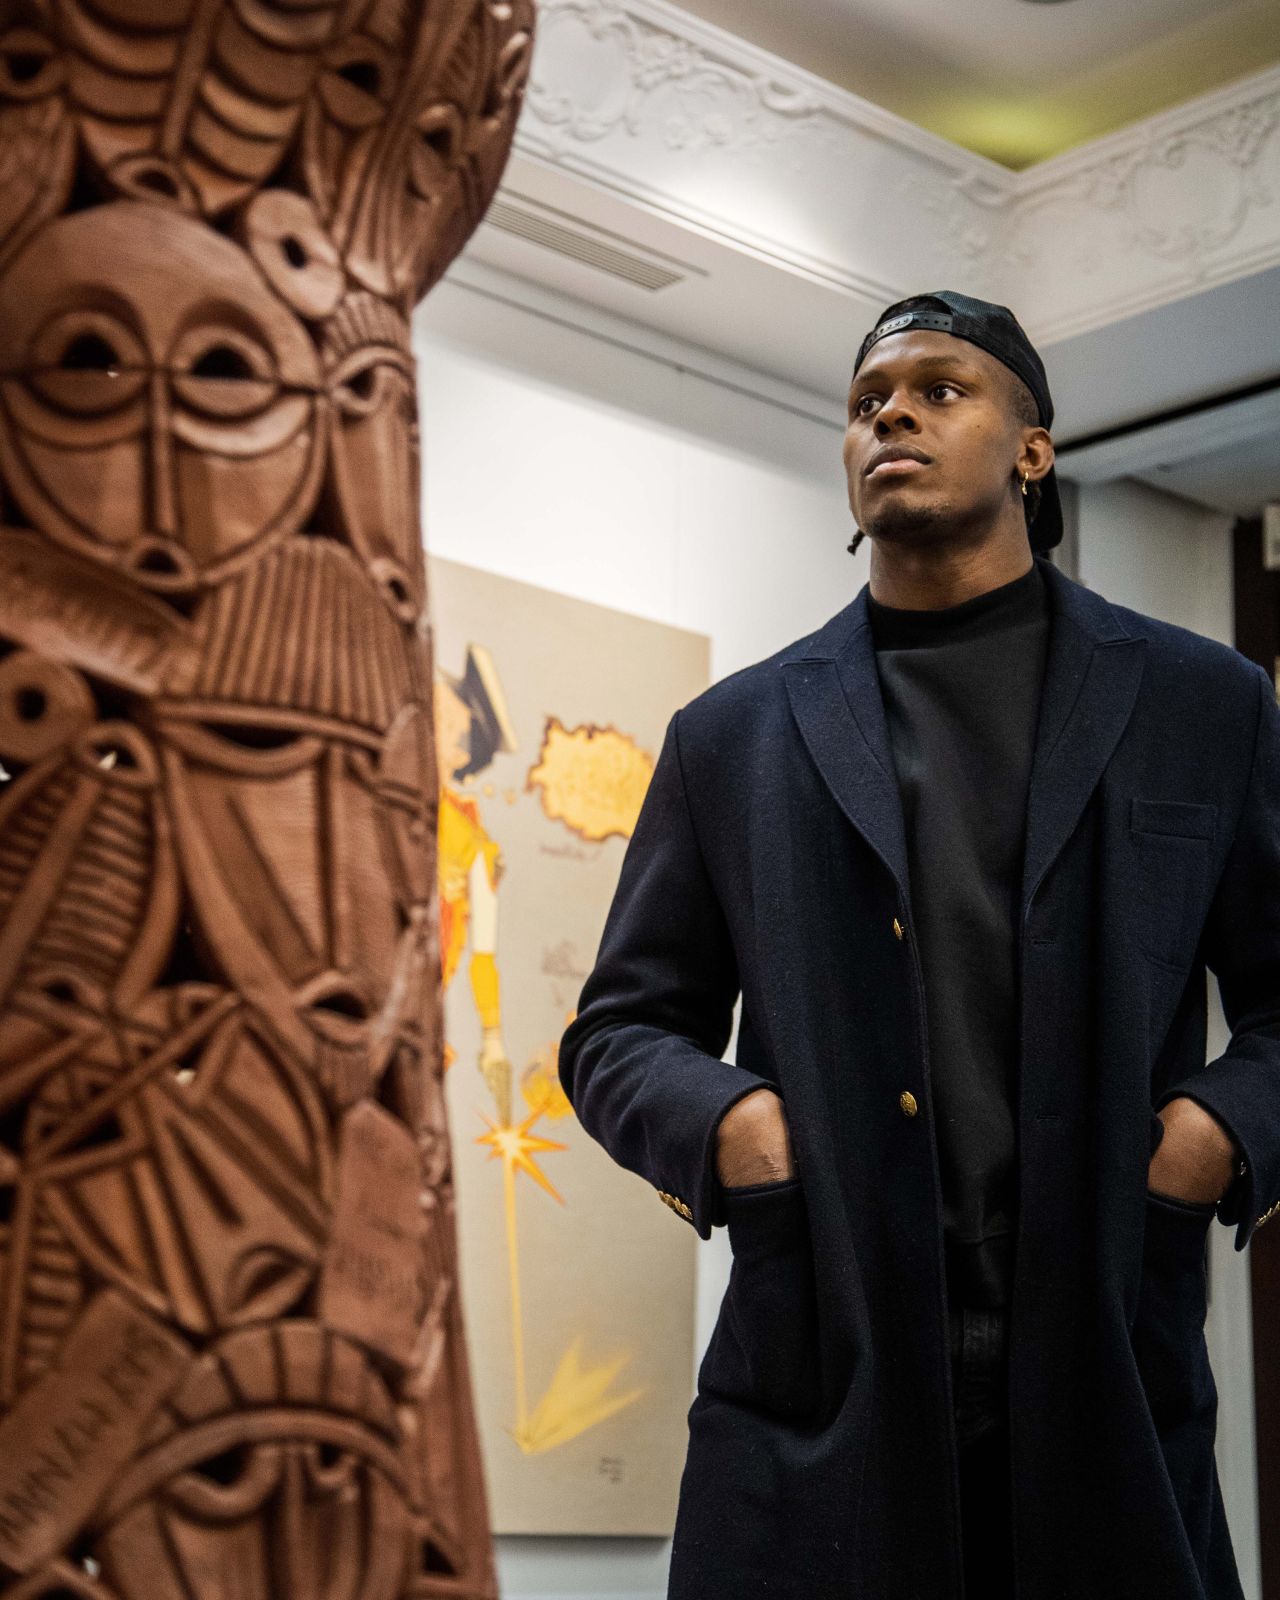 The exhibition is presented by England international rugby player Maro Itoje. "Art is something that I love, it touches the soul," he said.